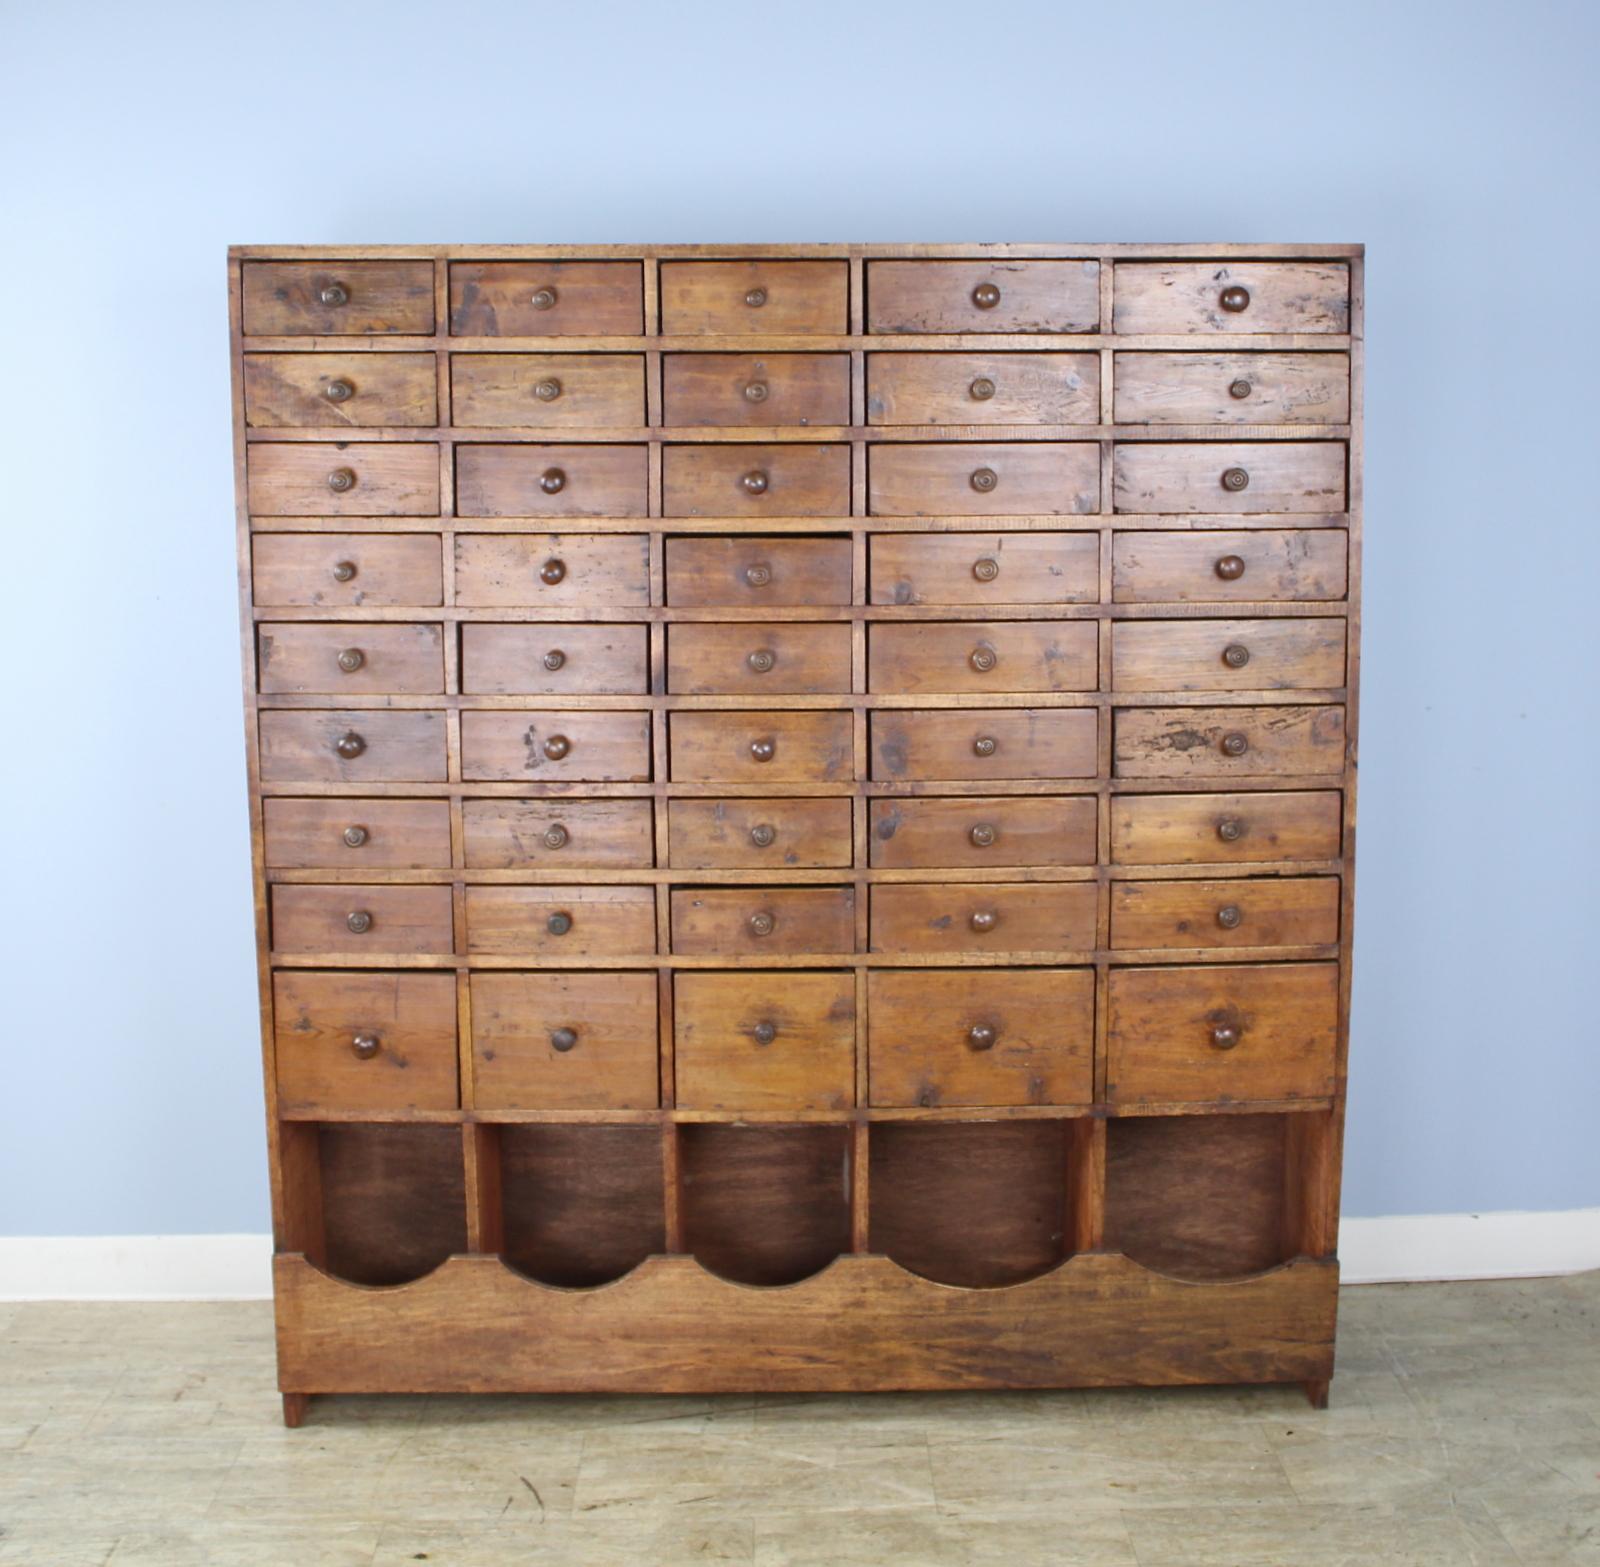 A large bank of drawers in rustic pine. Imposing and charming at the same time. The drawers are hand wrought and have mismatched knobs. The original red stain has been rubbed back and the piece has been newly stained and waxed for excellent shine